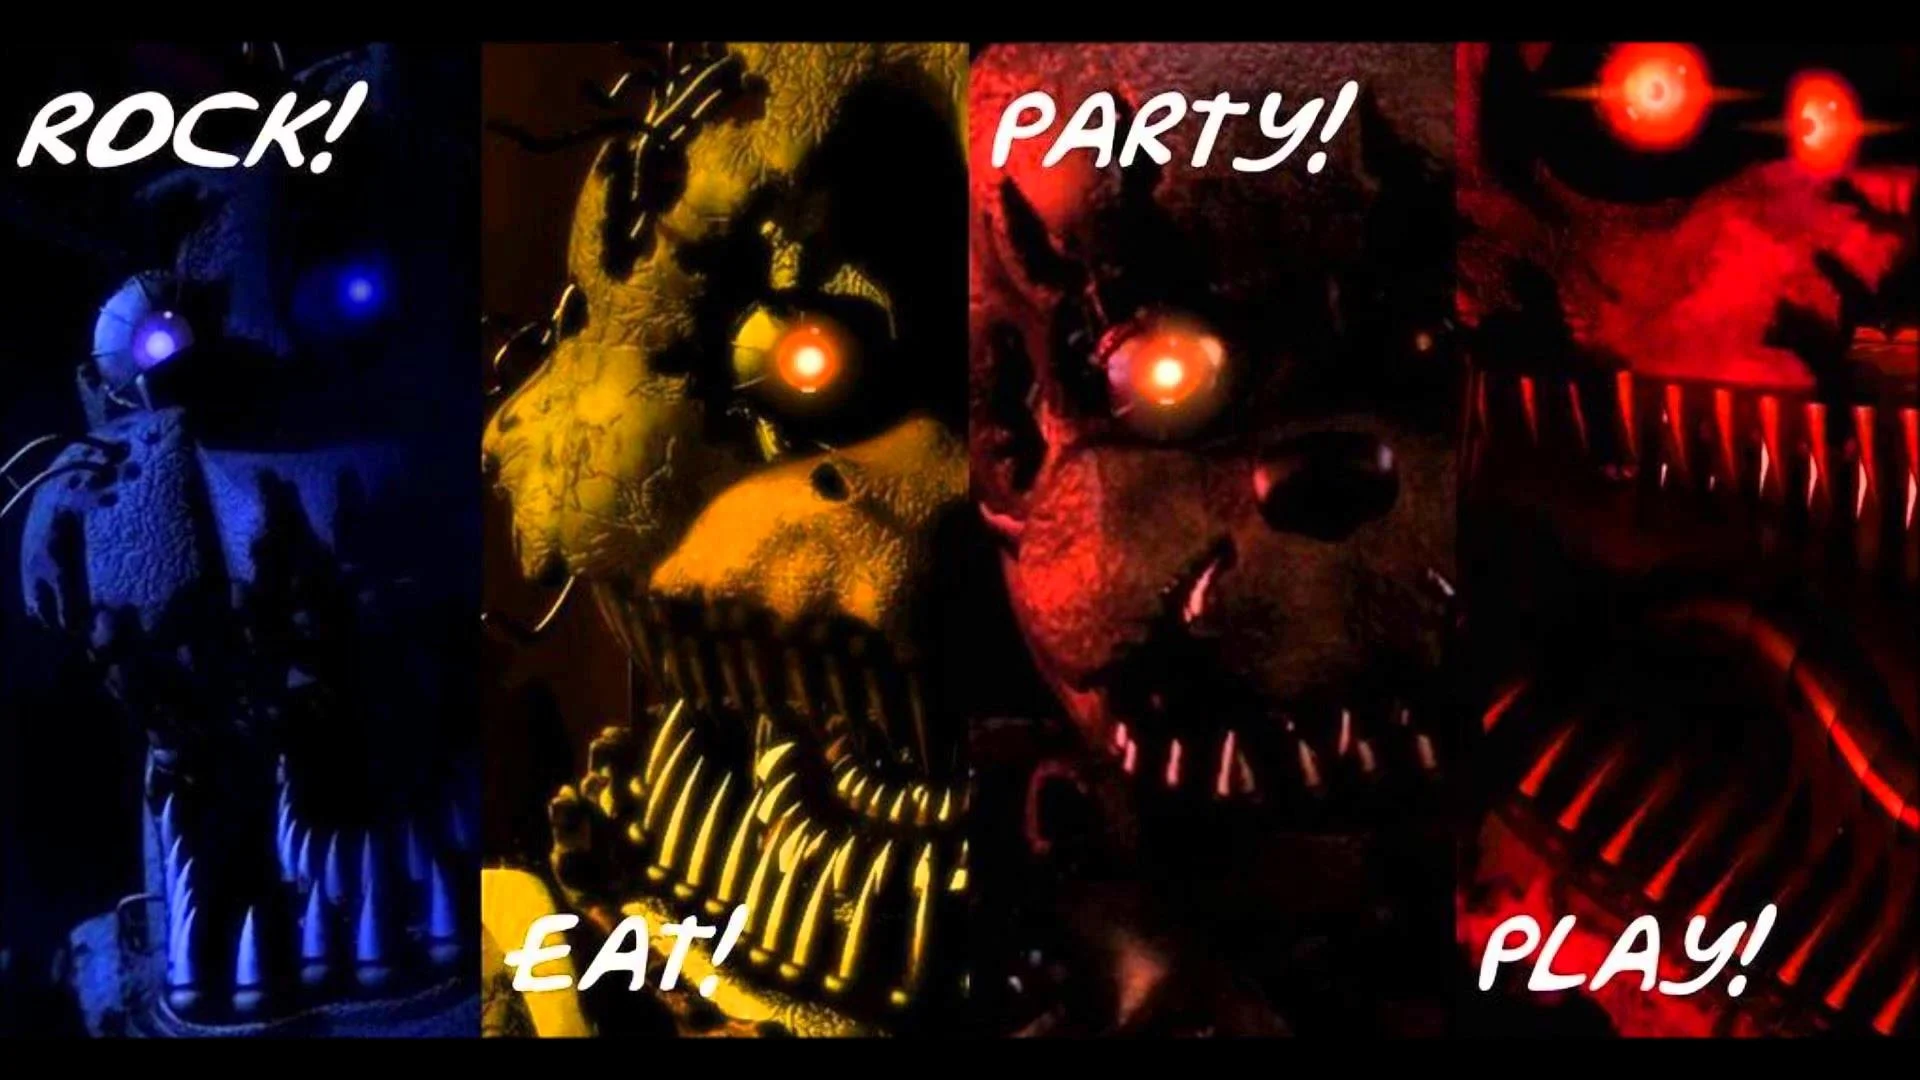 Five Nights at Freddys 4 Song – I Got No Time FNAF4 – The Living Tombstone Slowed Down – YouTube